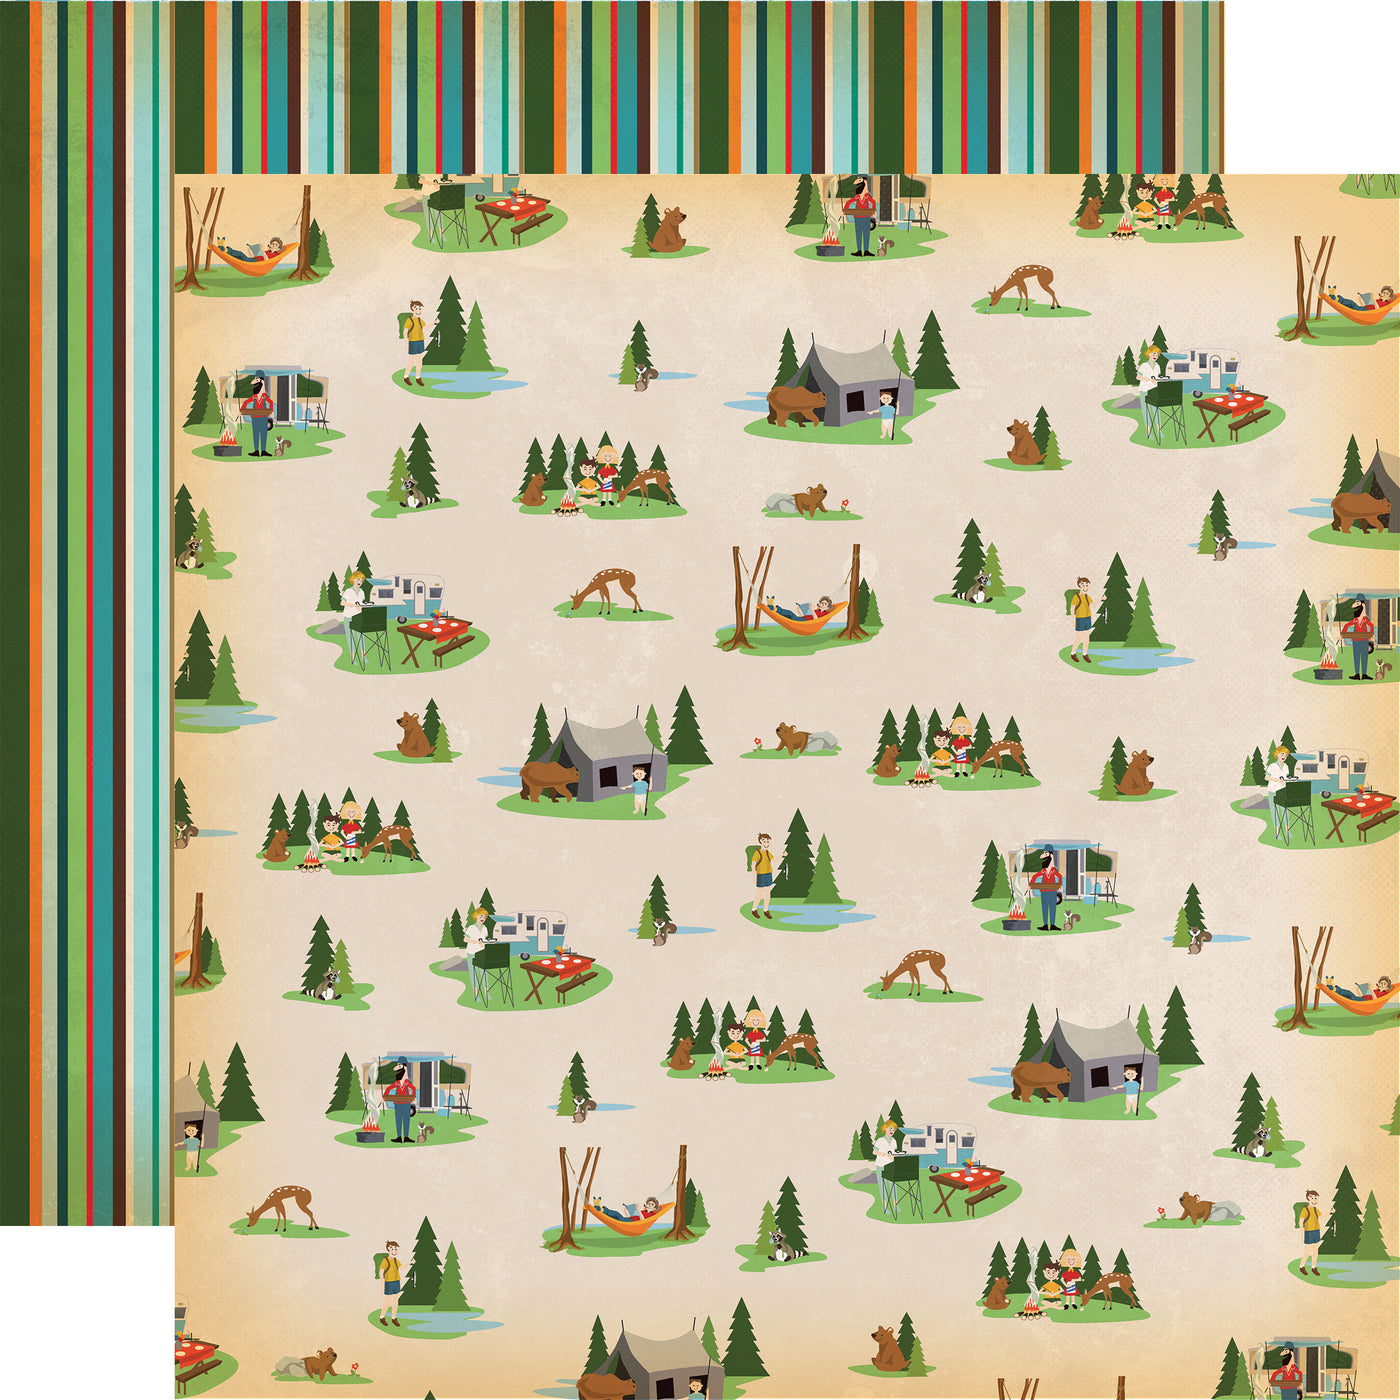 GONE CAMPING 12x12 Collection Kit - Carta Bella